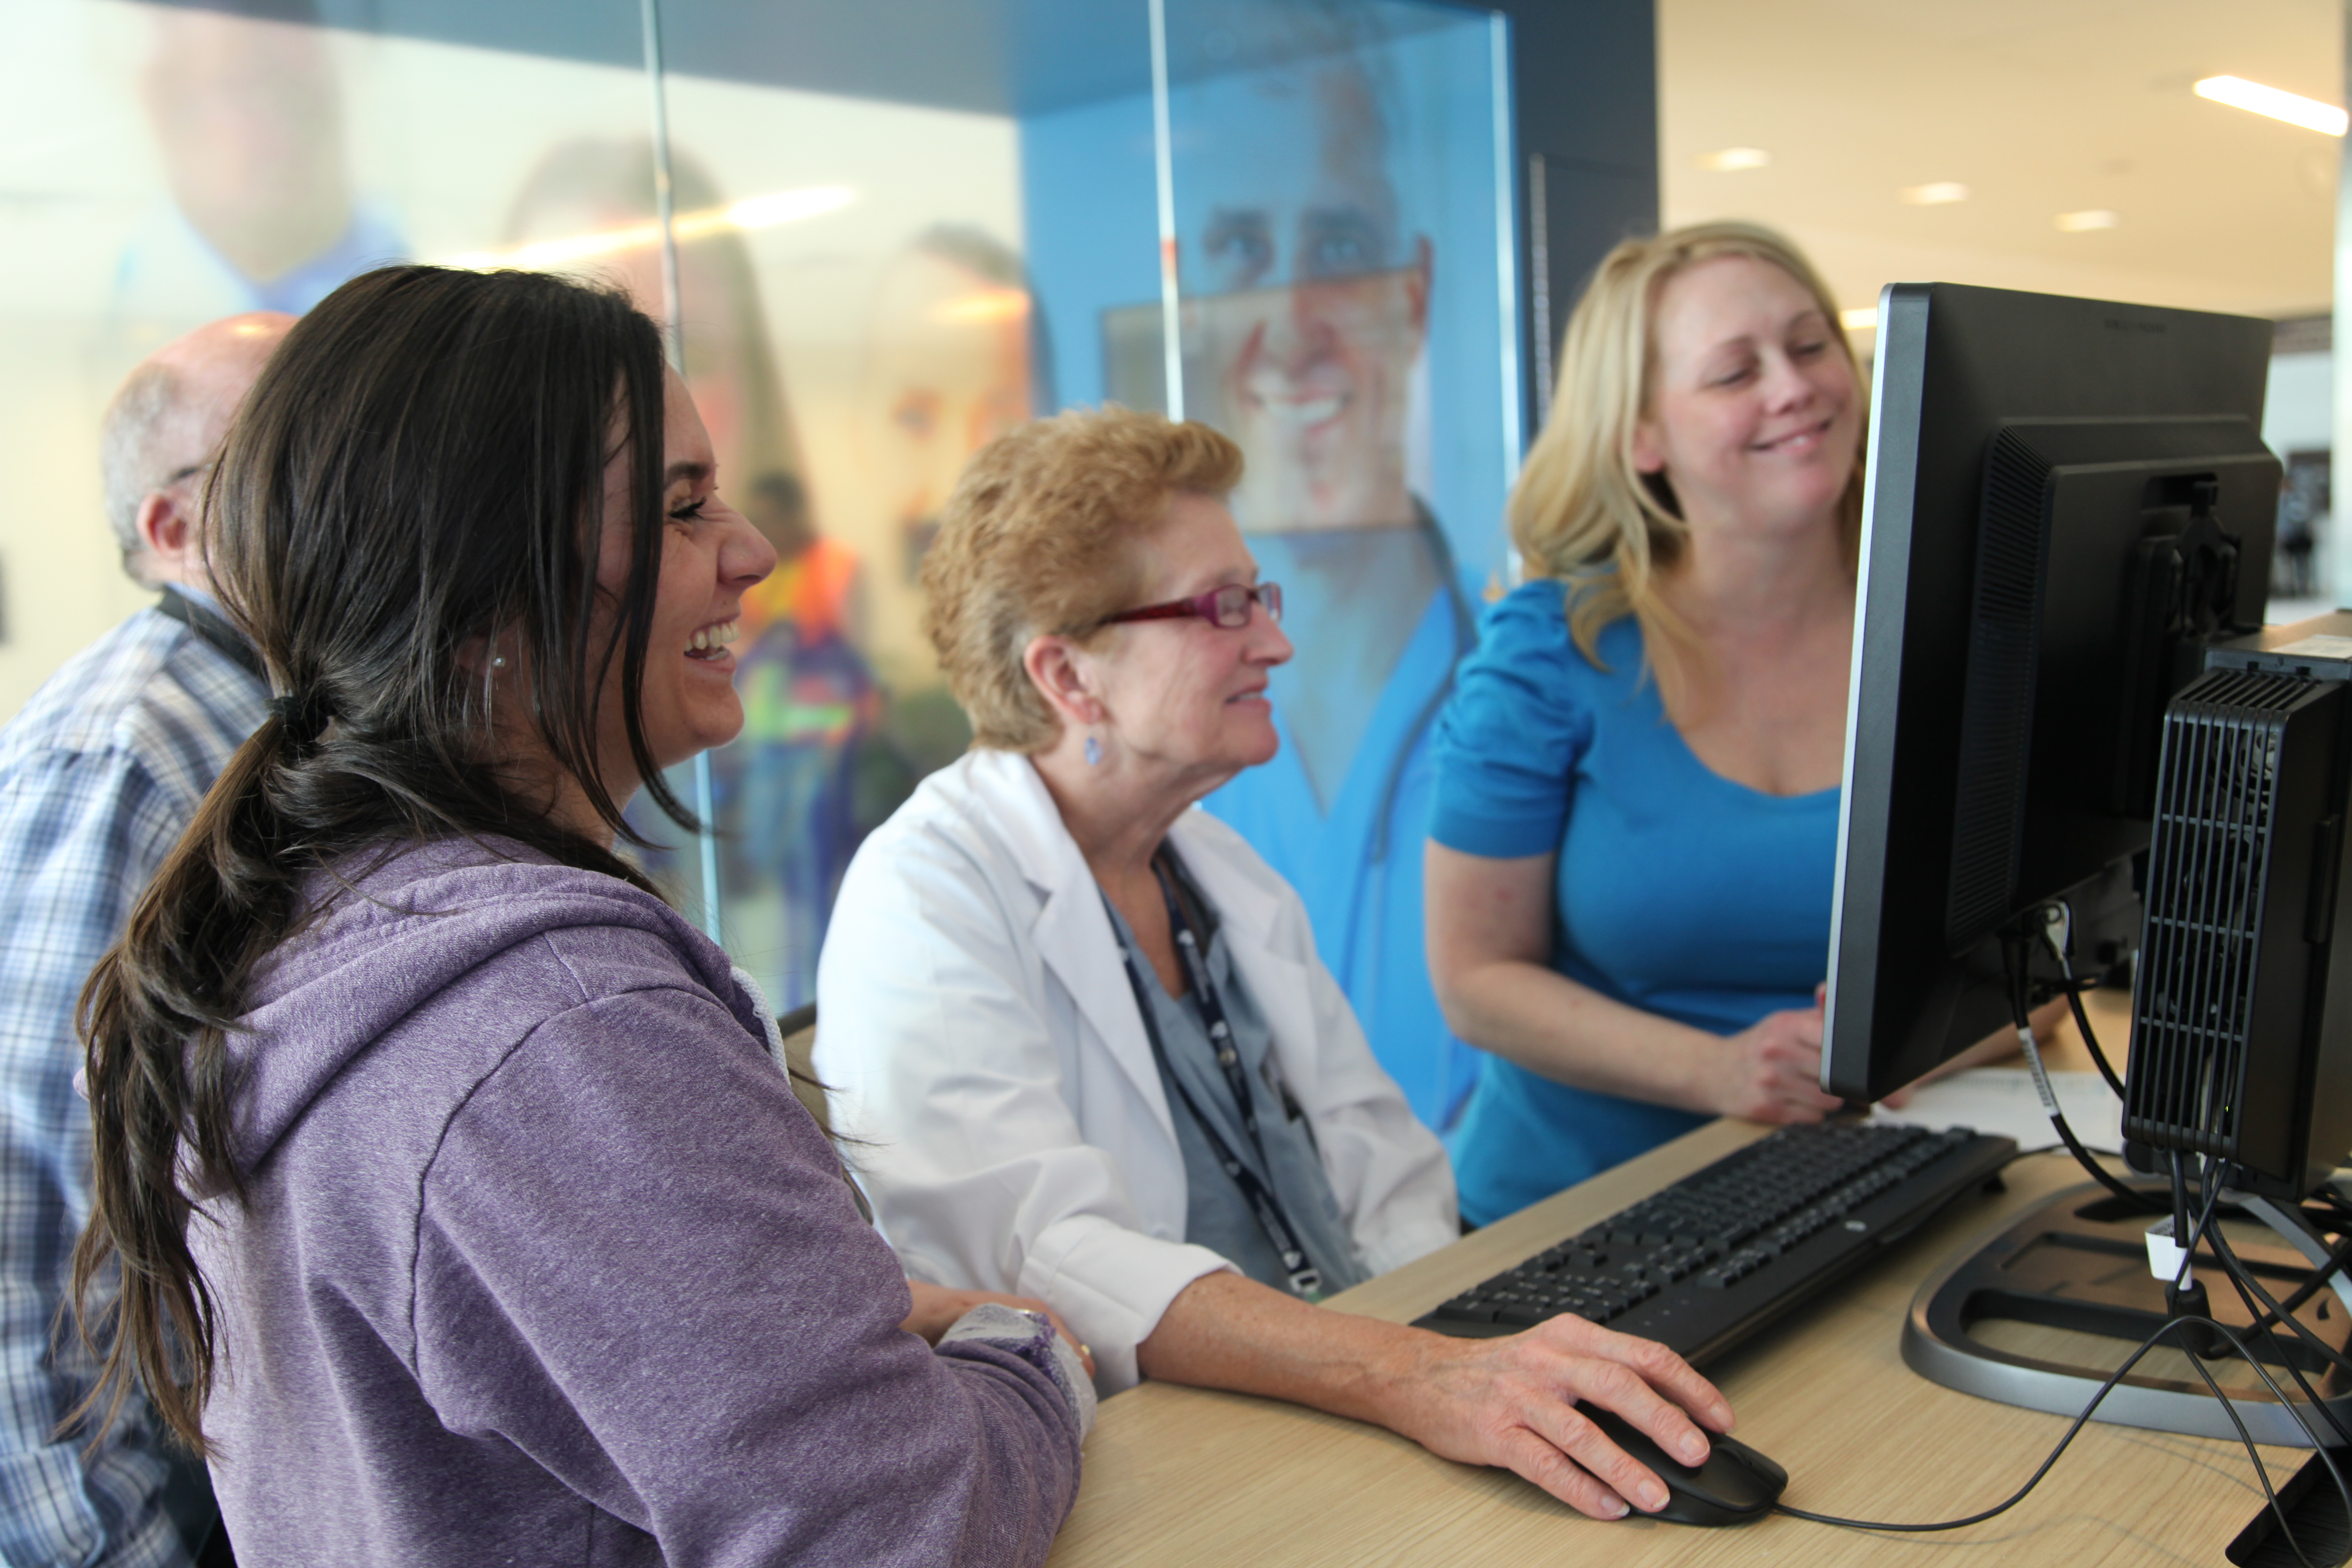 Jessica Sauls (far right), of Information Systems, with respiratory therapists Gabriella Andrade (at left) and Jane Bartholomew in the eCare information center